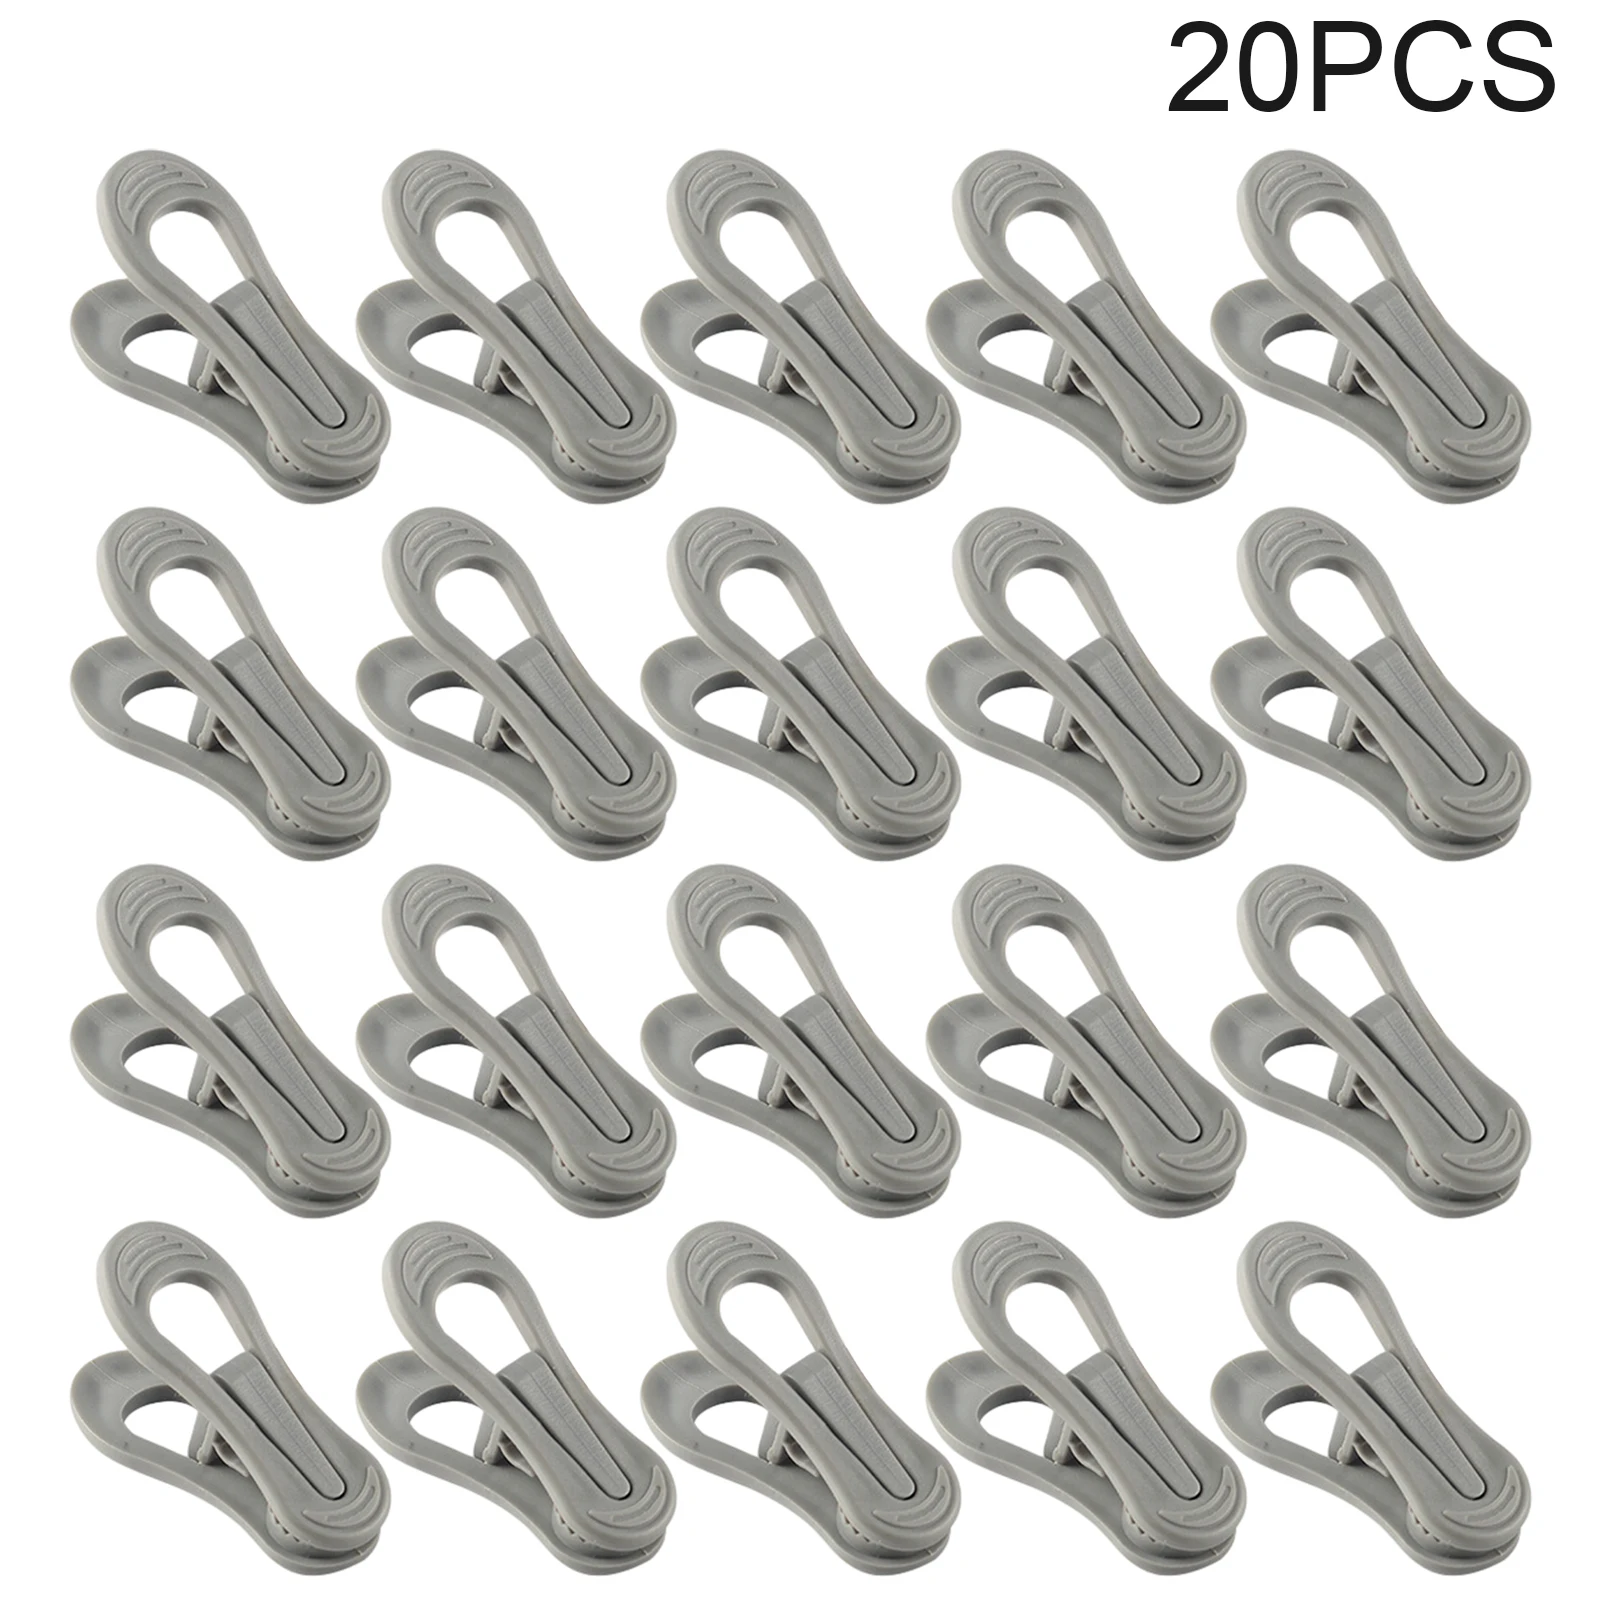 

20pcs Drying Racks Anti Slip Coat PP Grey Black Pants Home Clothes Clip Portable Small Windproof Skirt For Hangers Strong Grip